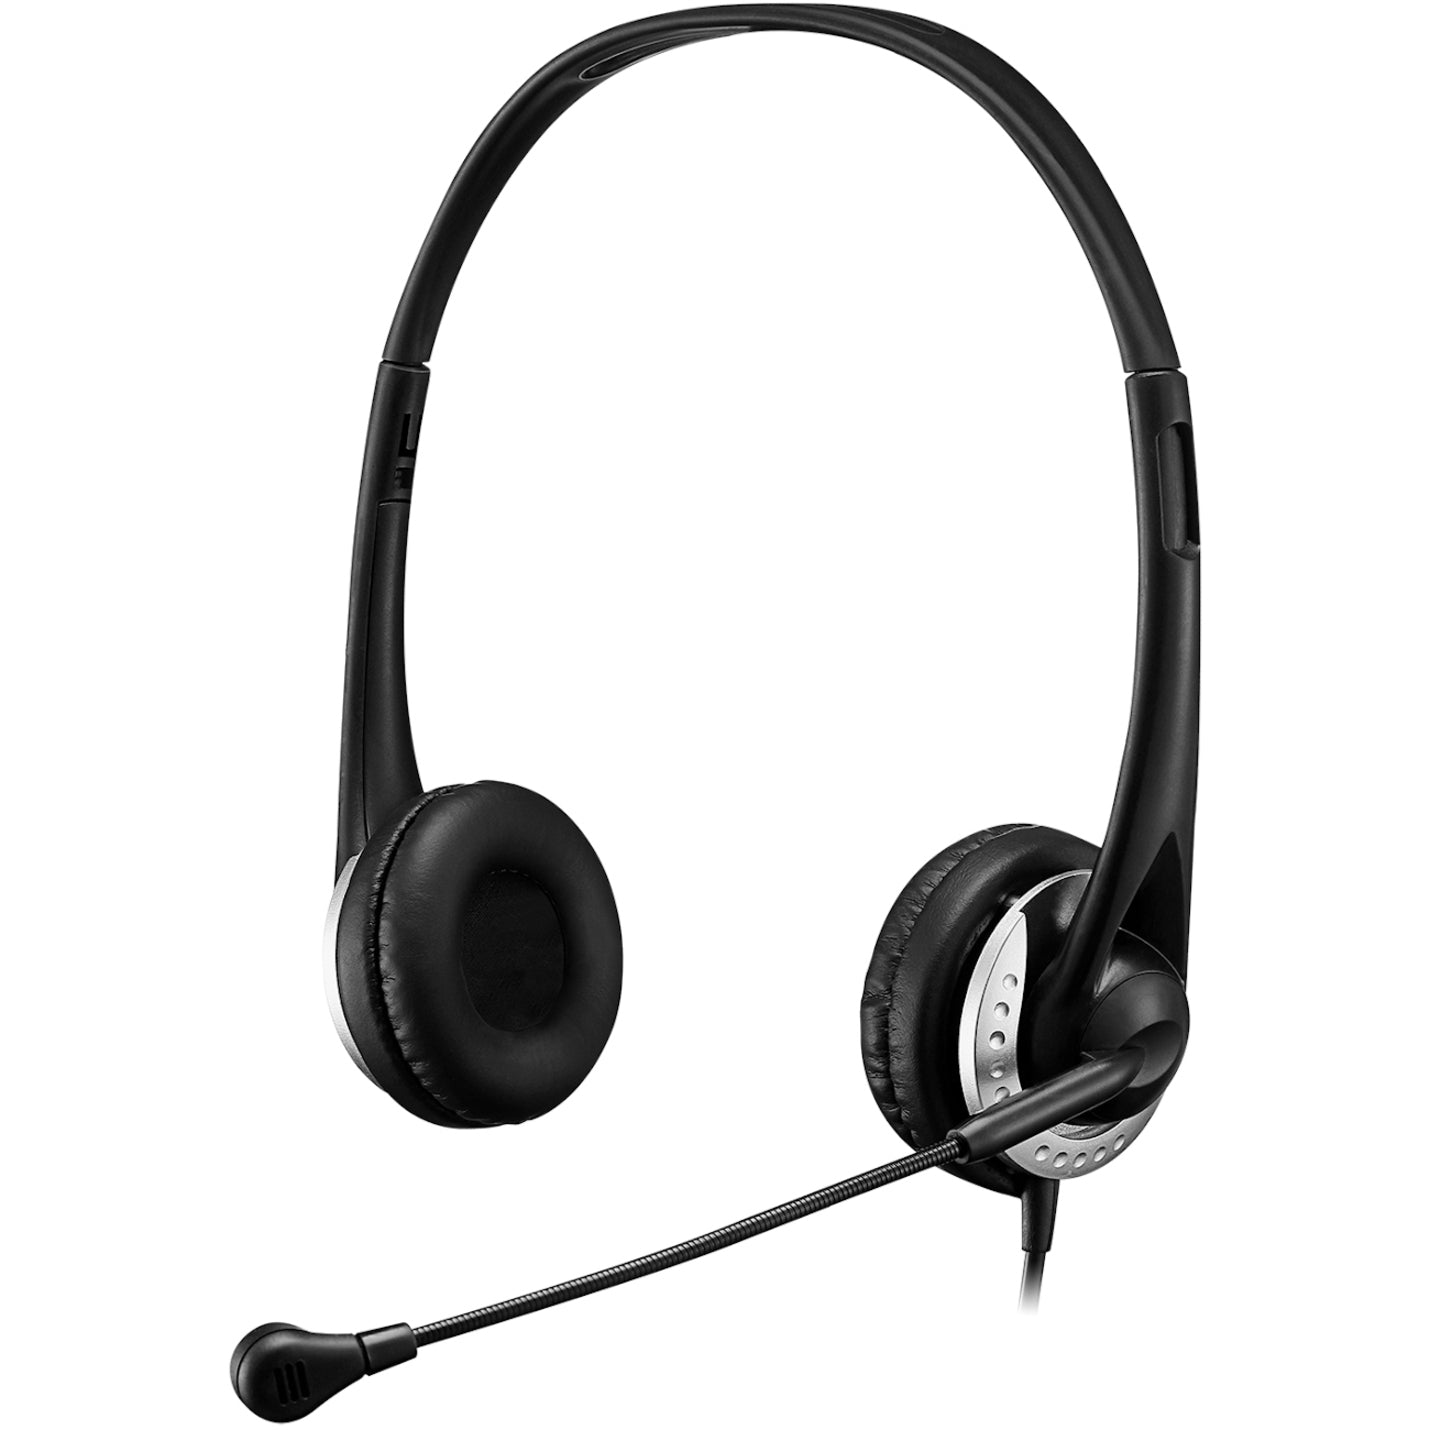 Adesso XTREAM P2 USB Wired Headset with Built-in Microphone, Over-the-head, Noise Cancelling, 1 Year Warranty